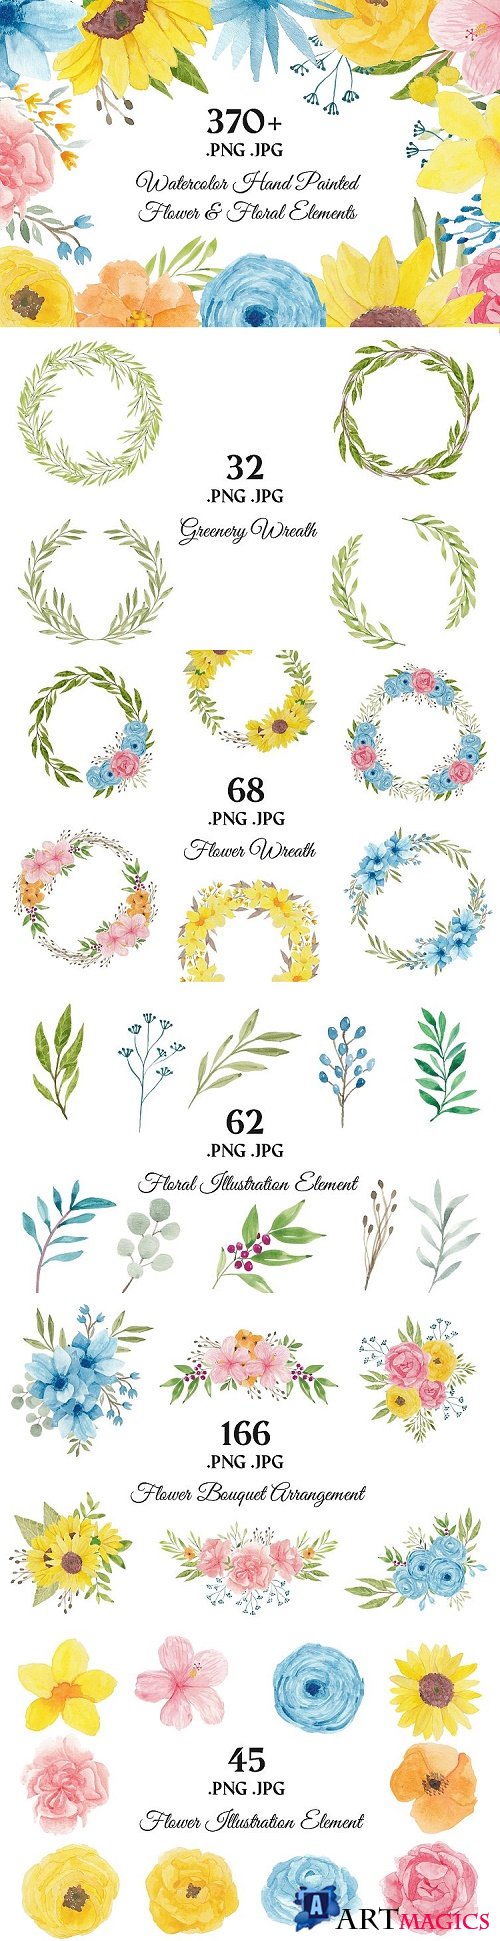 373 Flower and Floral Watercolor Illustration Clip Art  - 421746